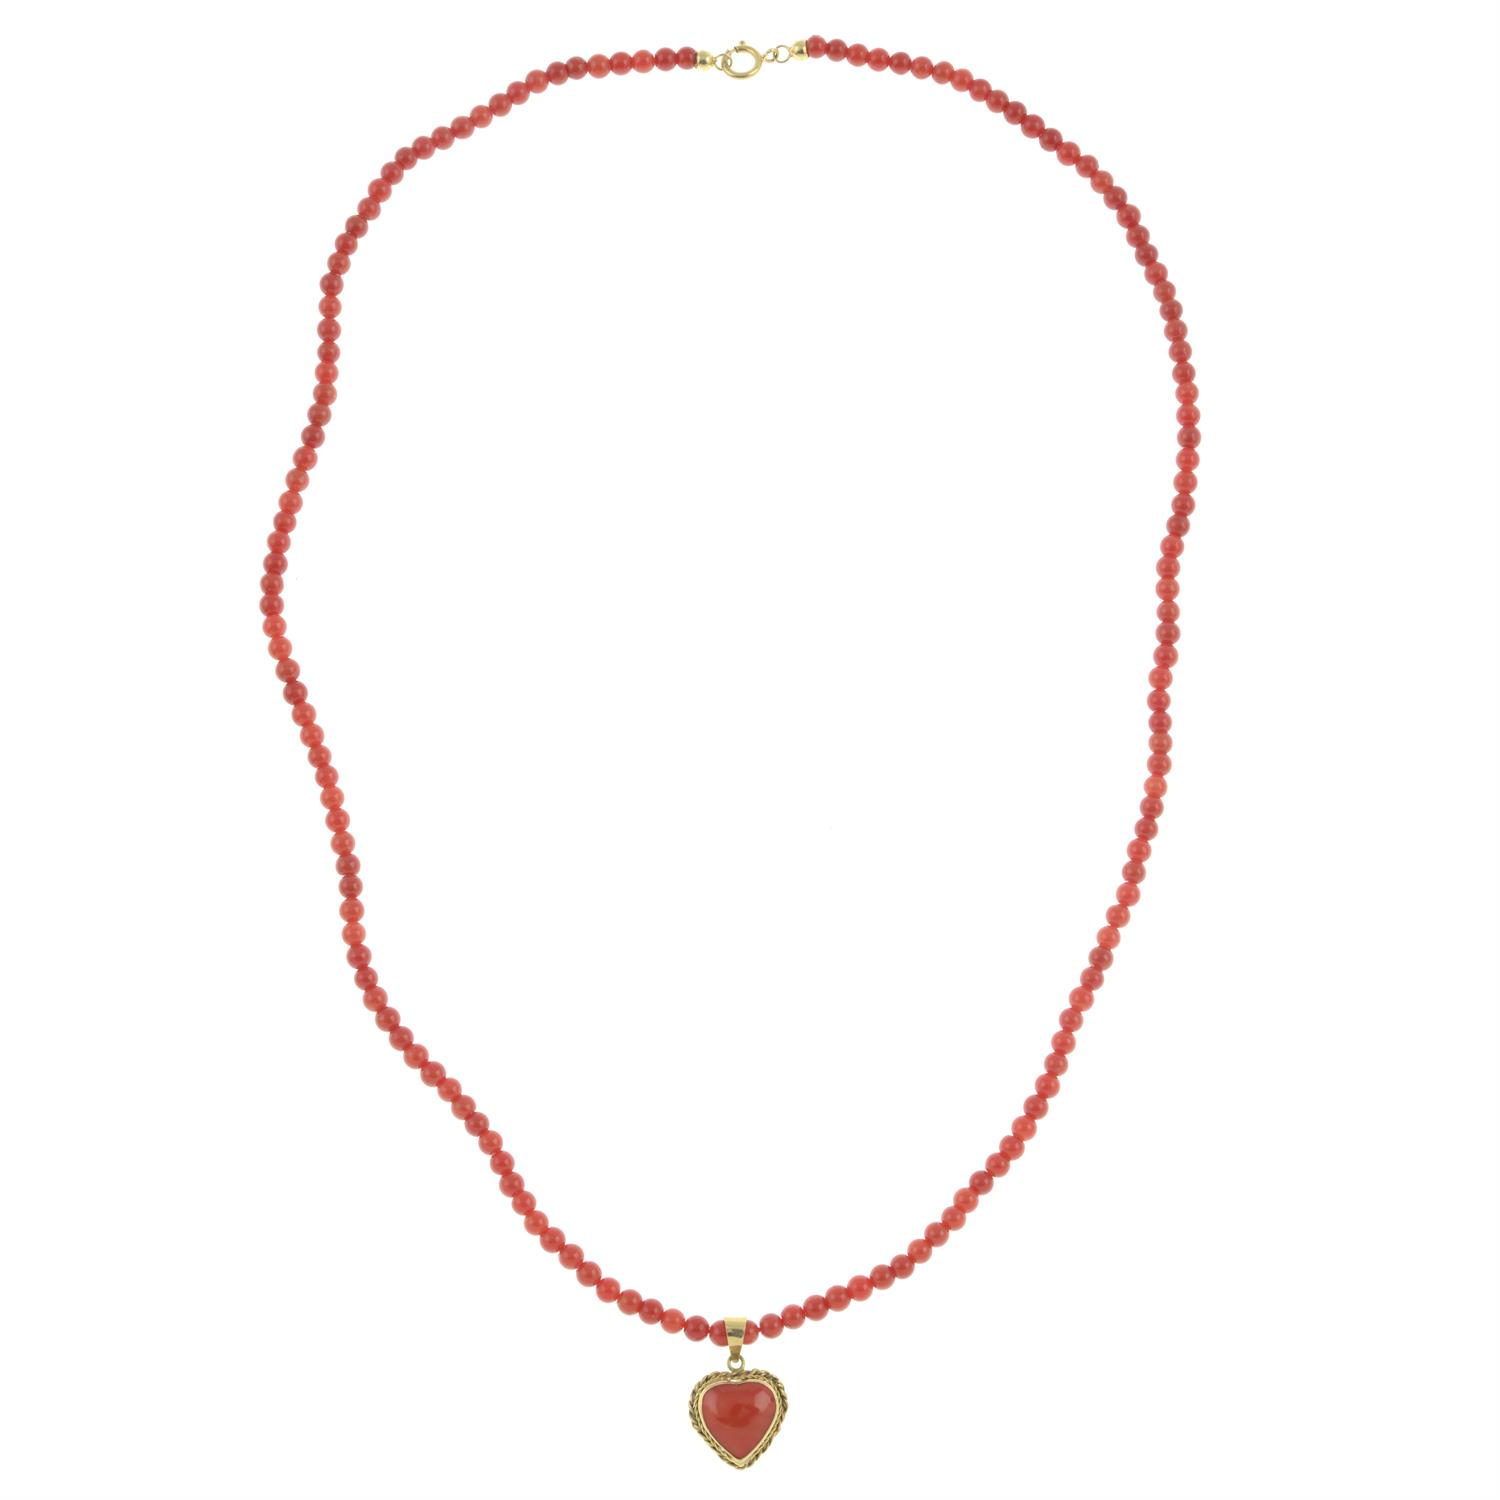 Coral single-strand bead necklace, with heart-shape coral pendant